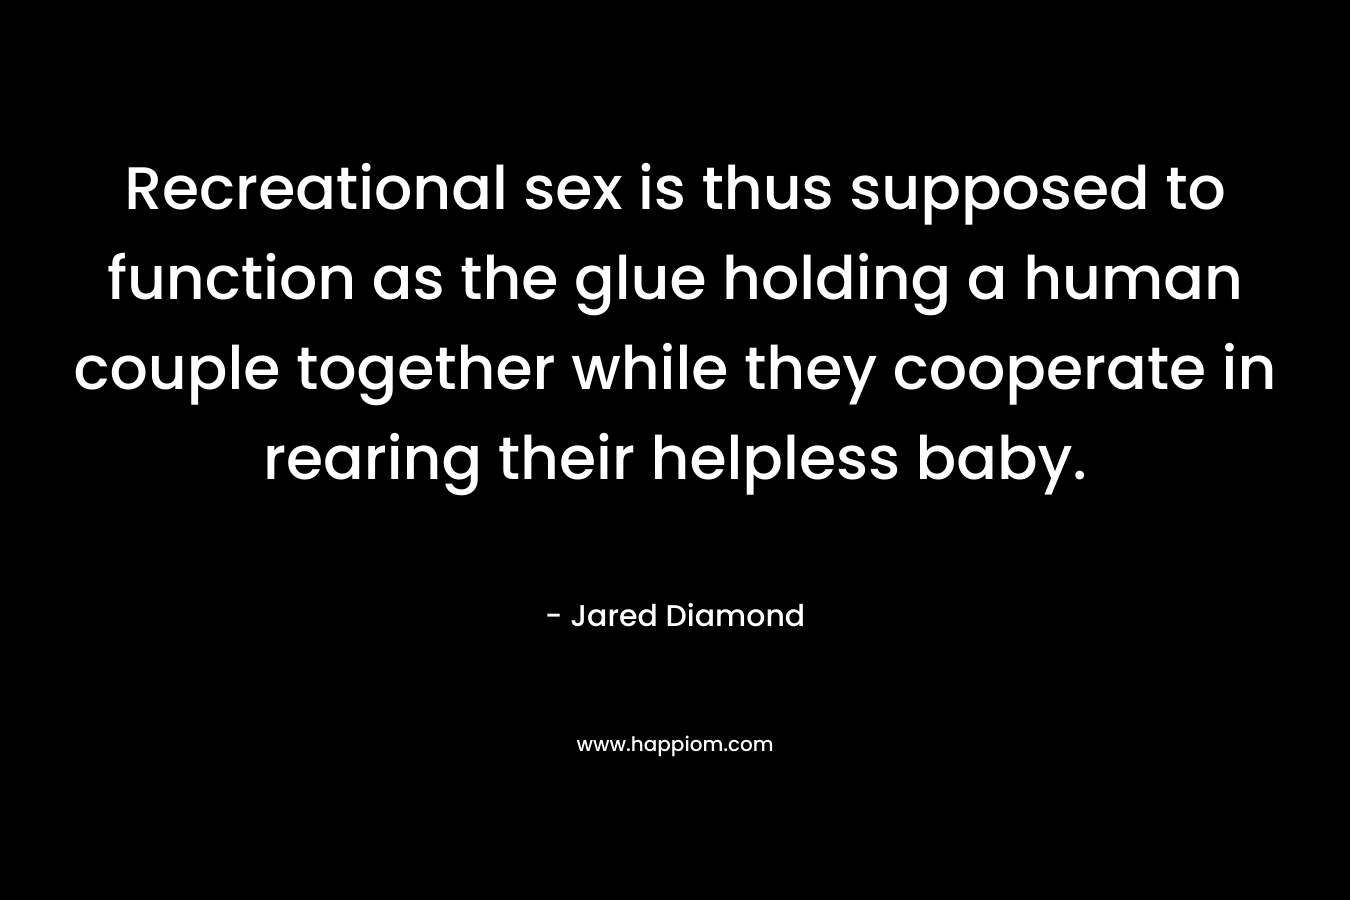 Recreational sex is thus supposed to function as the glue holding a human couple together while they cooperate in rearing their helpless baby.